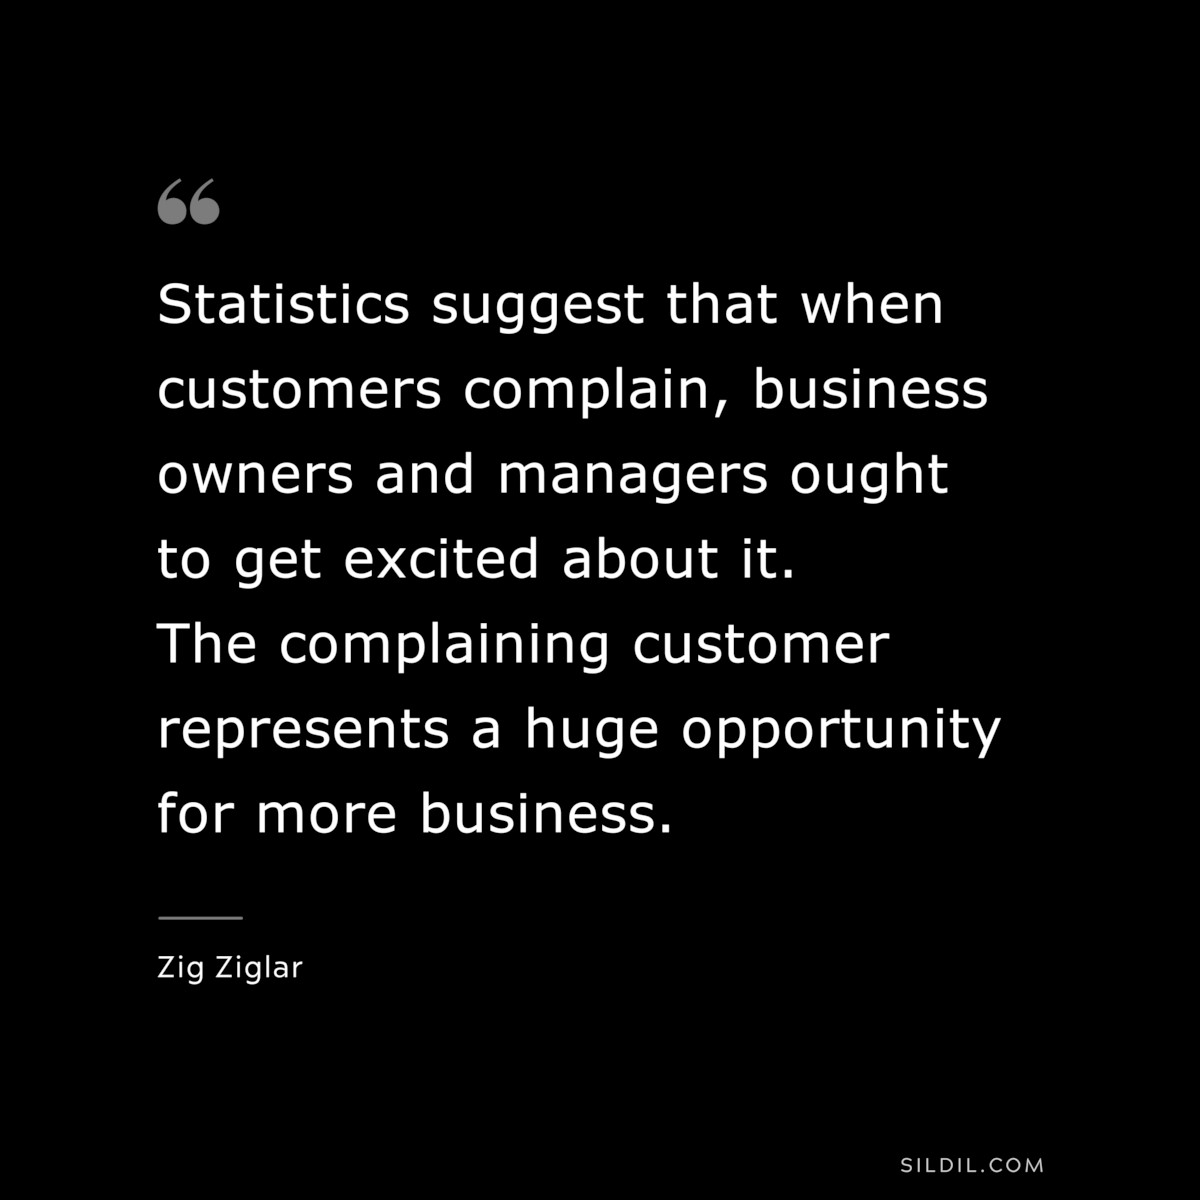 Statistics suggest that when customers complain, business owners and managers ought to get excited about it. The complaining customer represents a huge opportunity for more business. ― Zig Ziglar